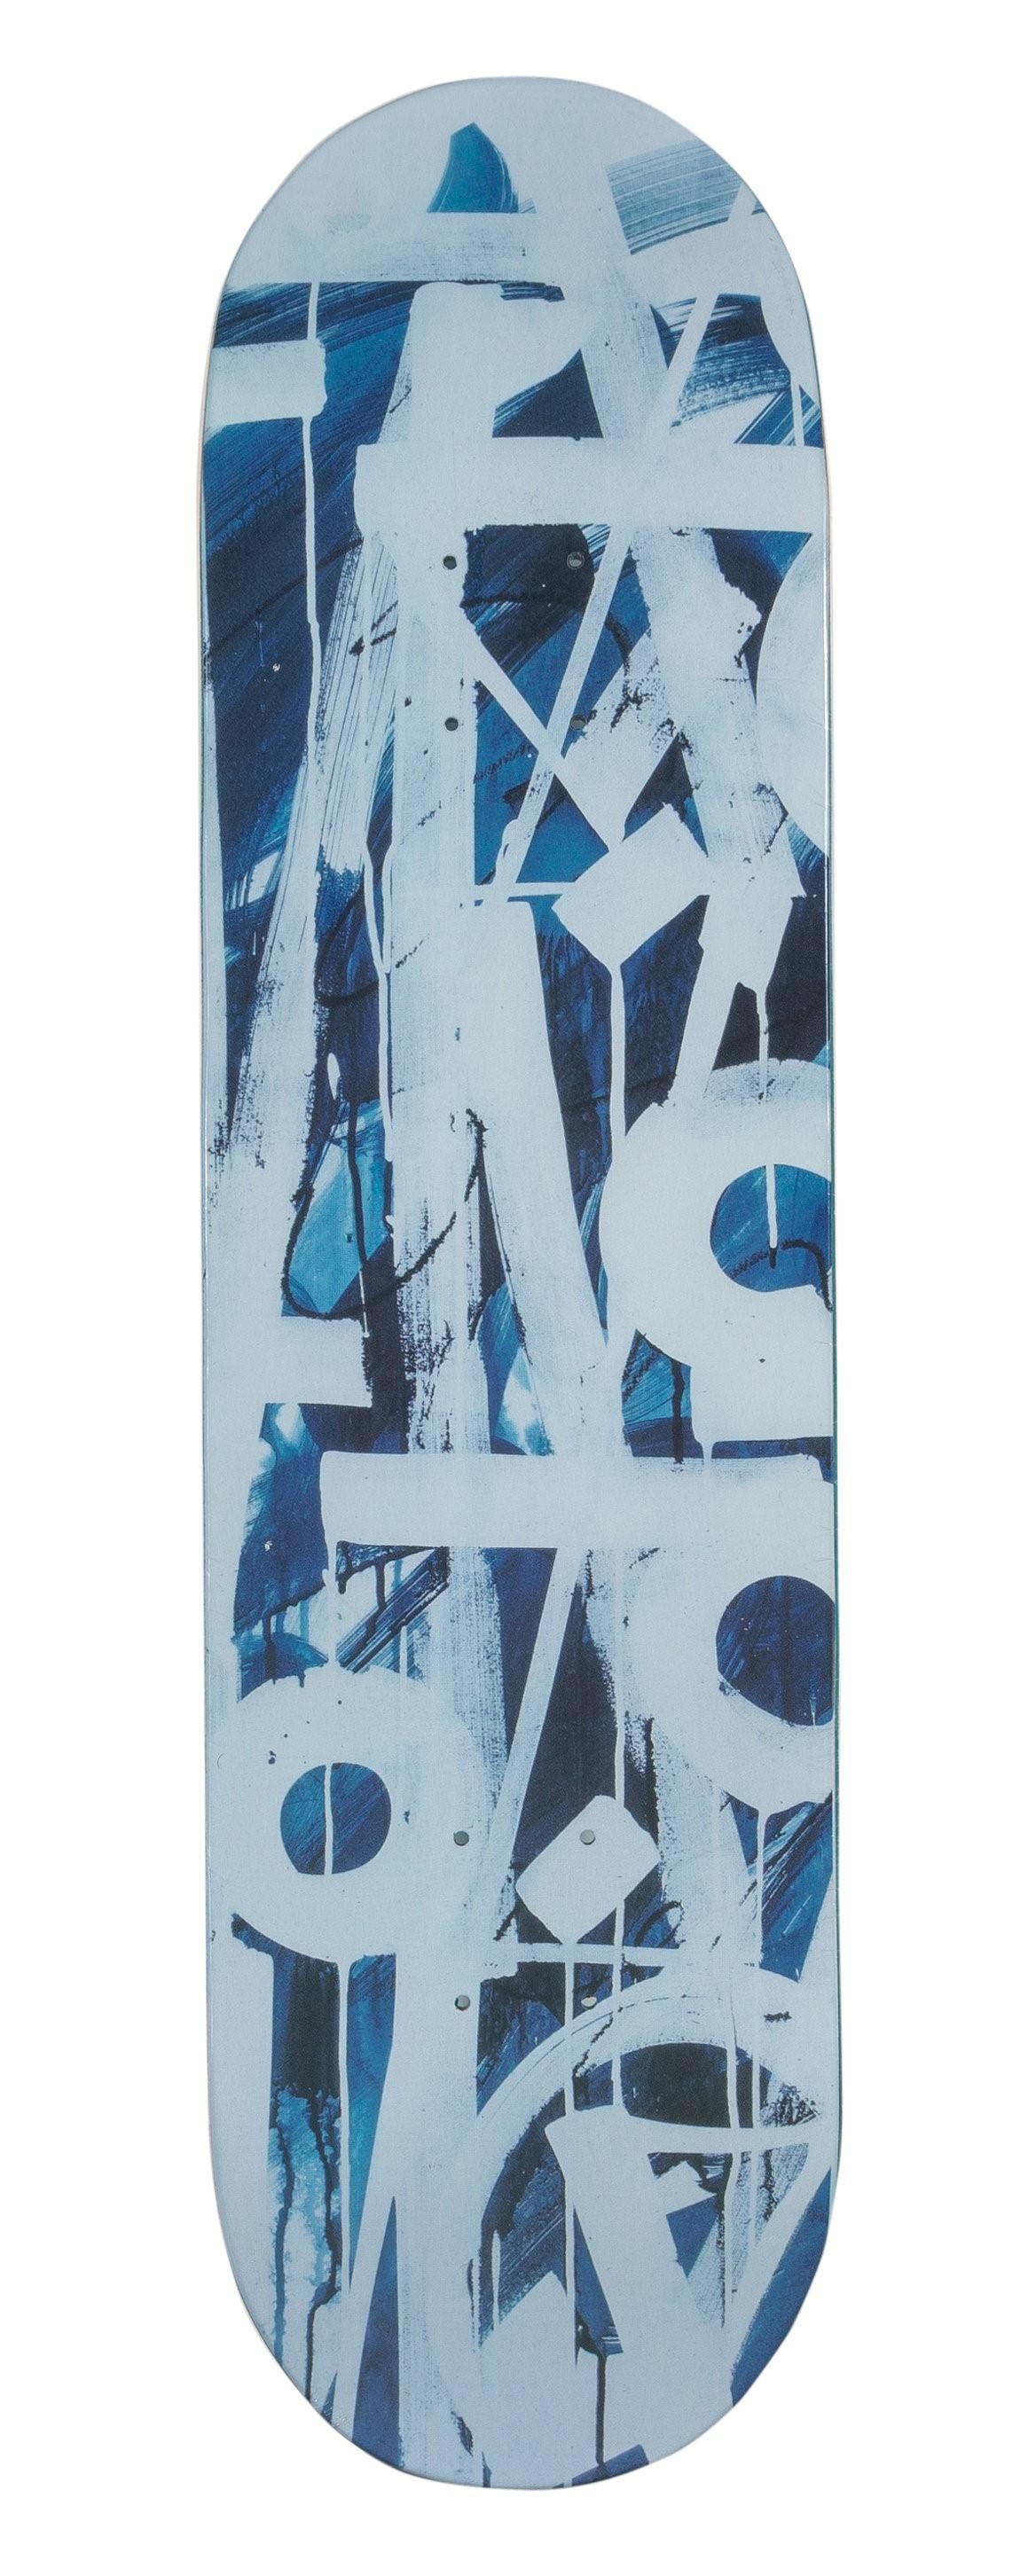 Up for sale is a complete set of skate decks featuring offset lithographs in colors by the renowned artist Retna. This set, produced by Beyond the Streets in Los Angeles, consists of five different editions, each with a limited number of 25, 50, 75,